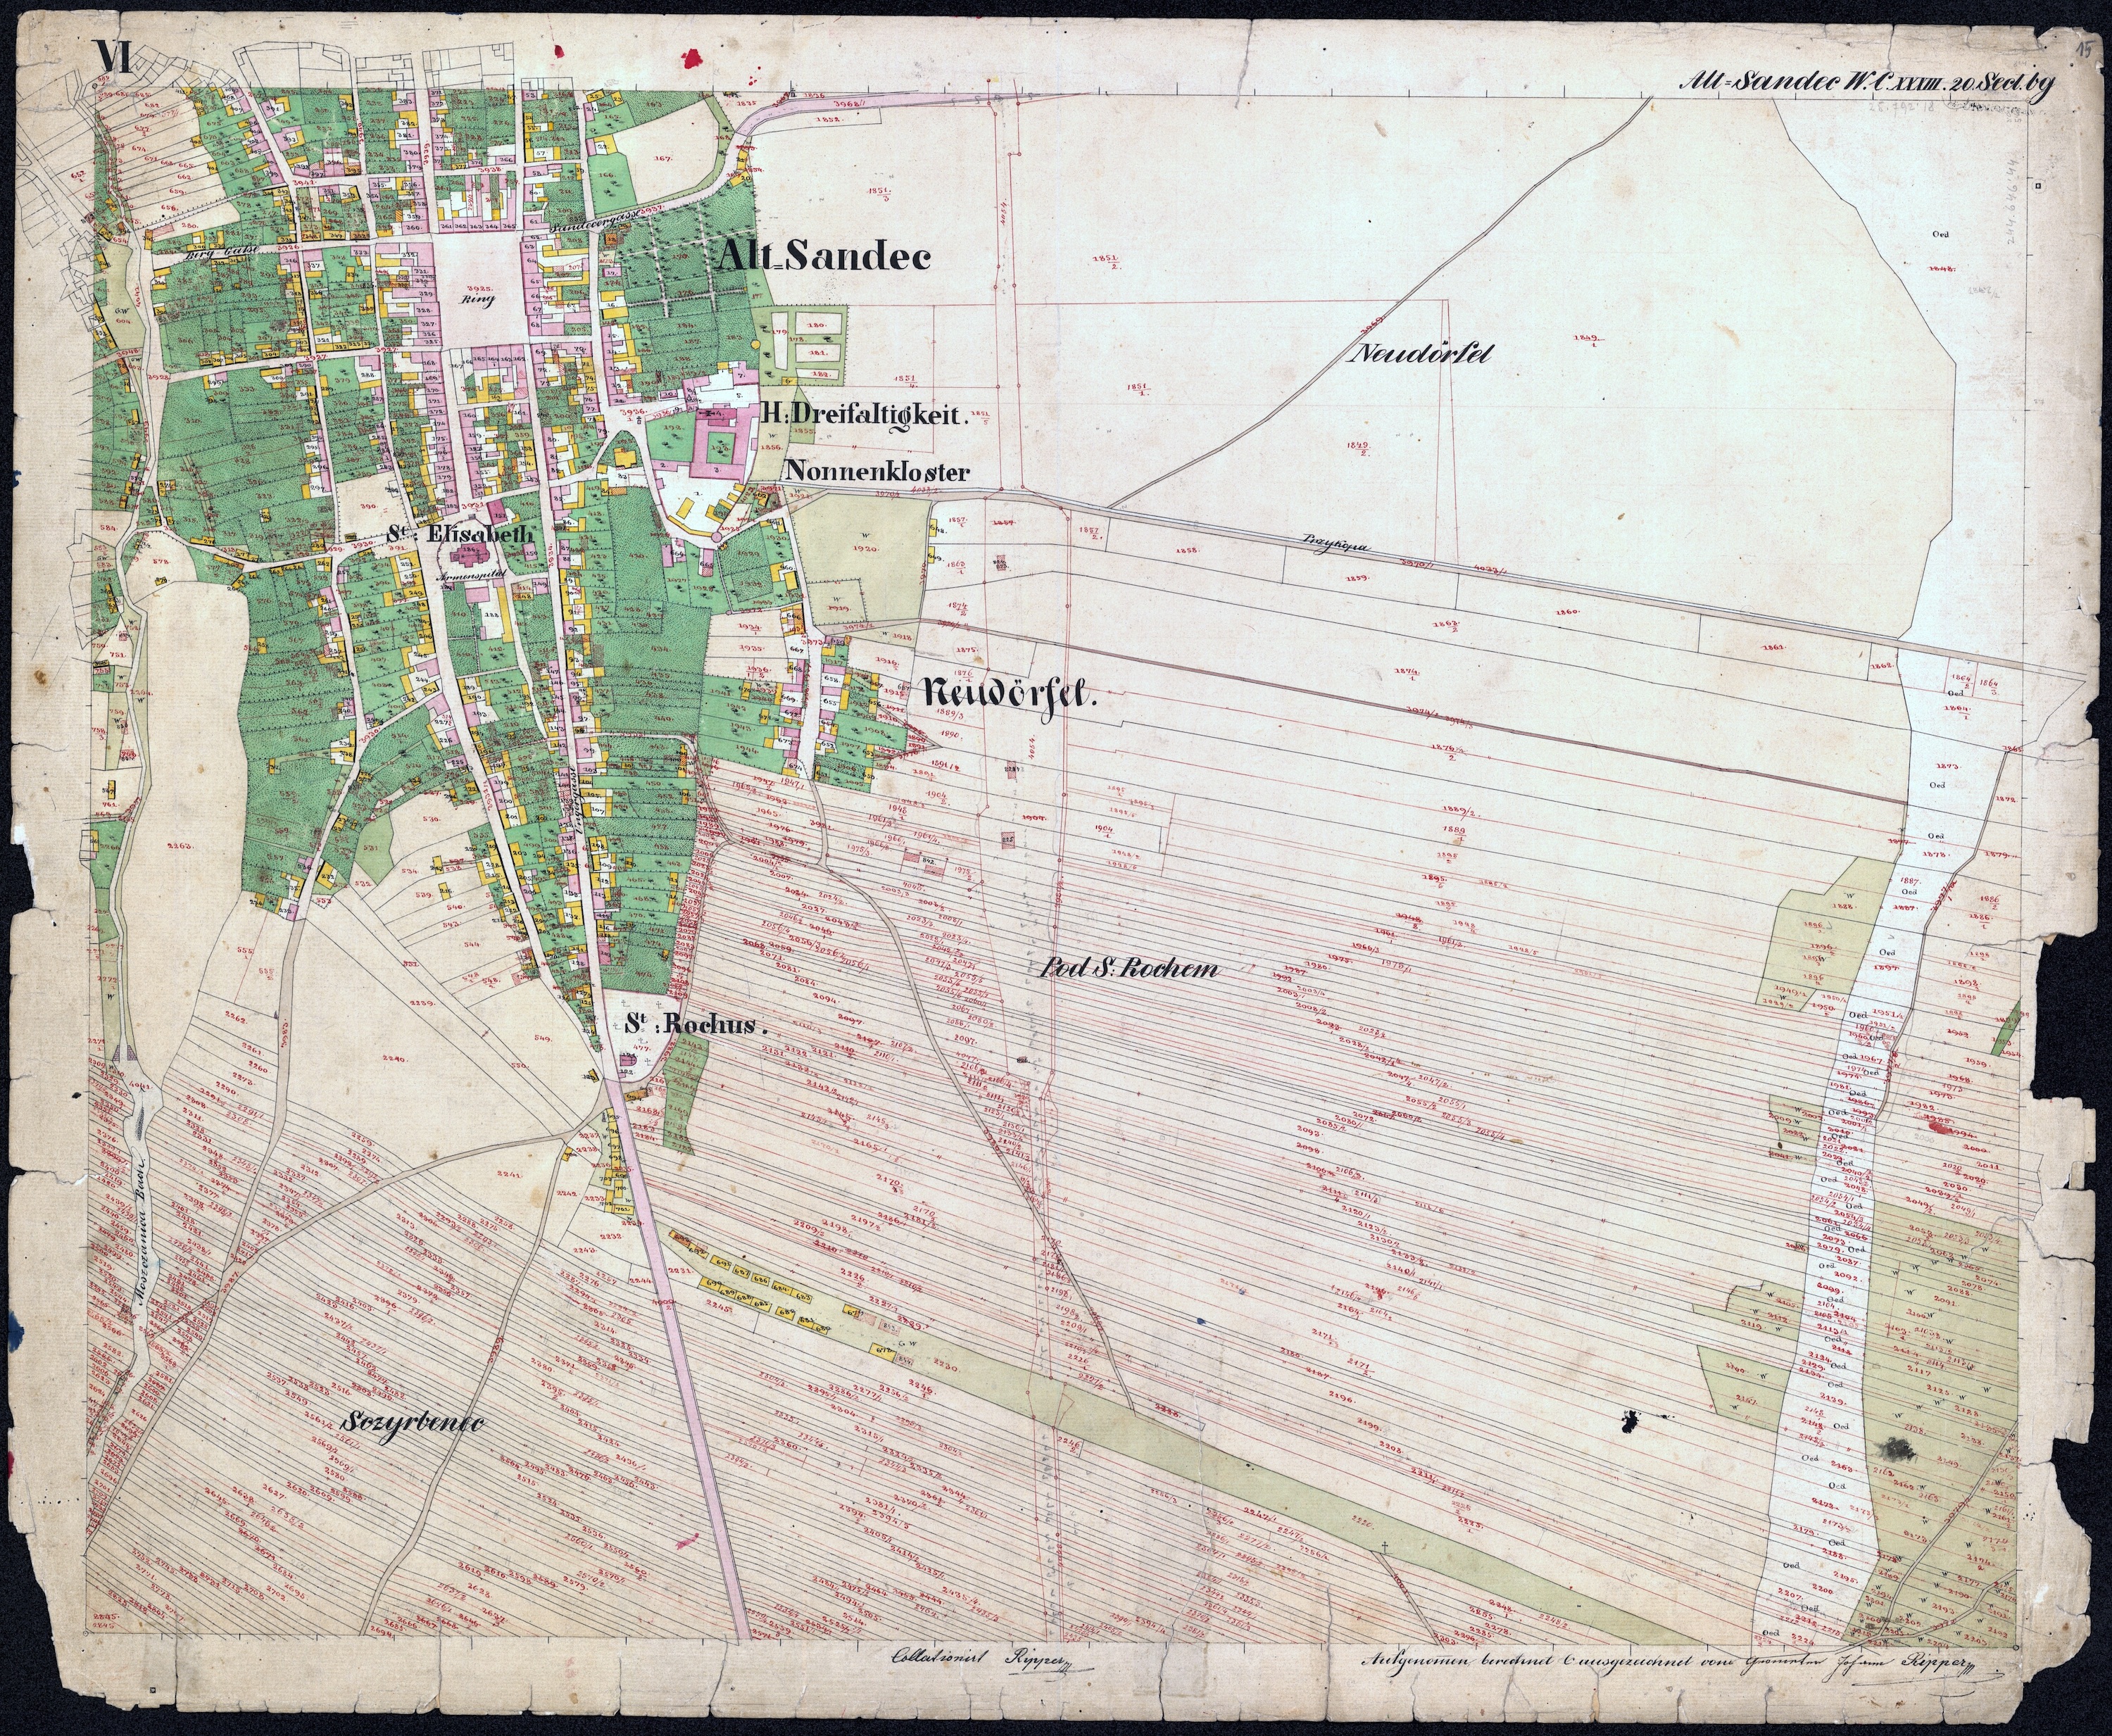 the 1847 cadastral map of Stary Sącz